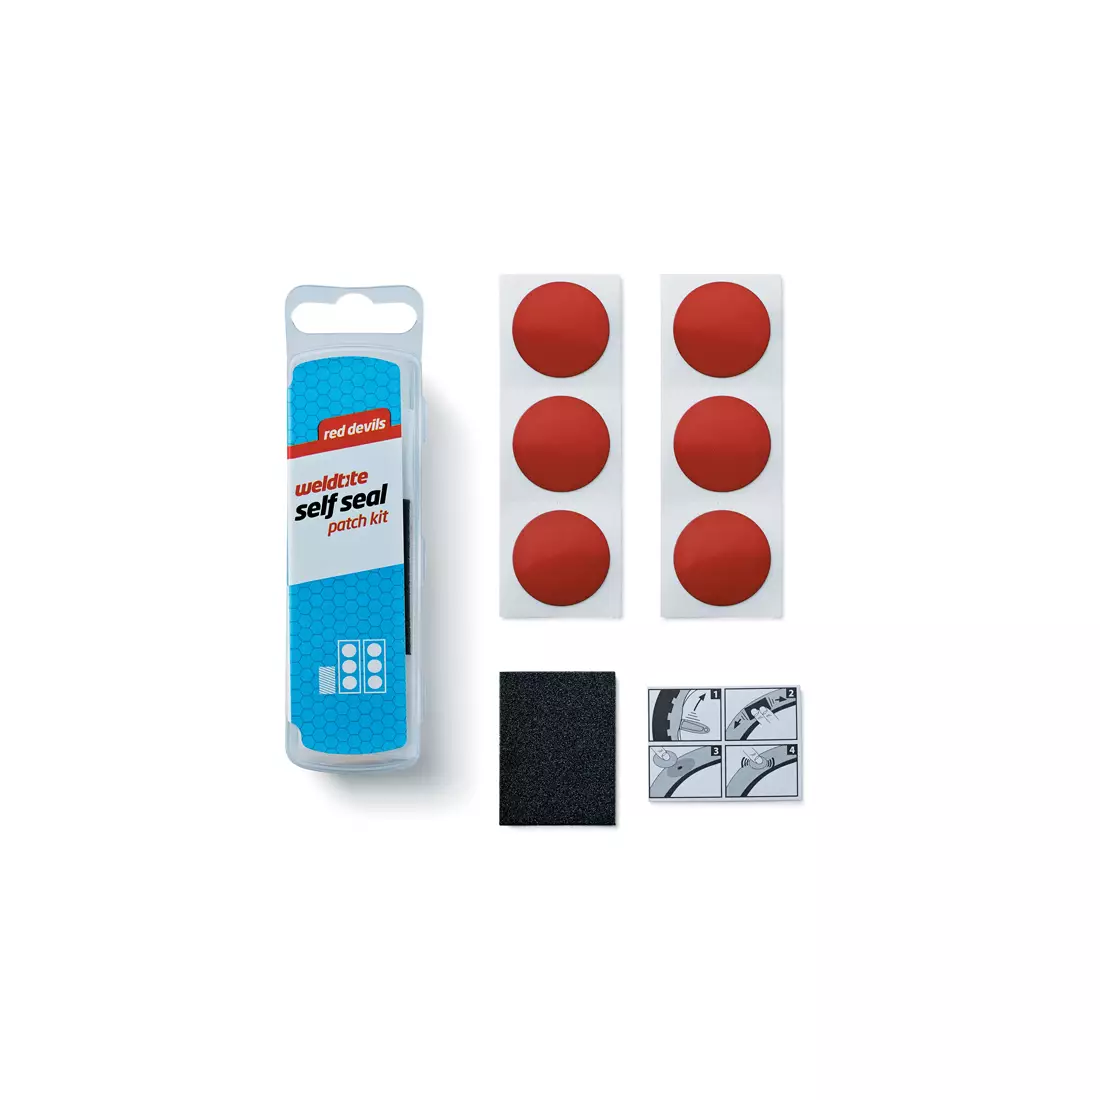 Tire patches set WELDTITE SS19 PUNCTURE RED DEVILS SELF SEAL PATCH KIT 6x self-adhesive patches WLD-1036